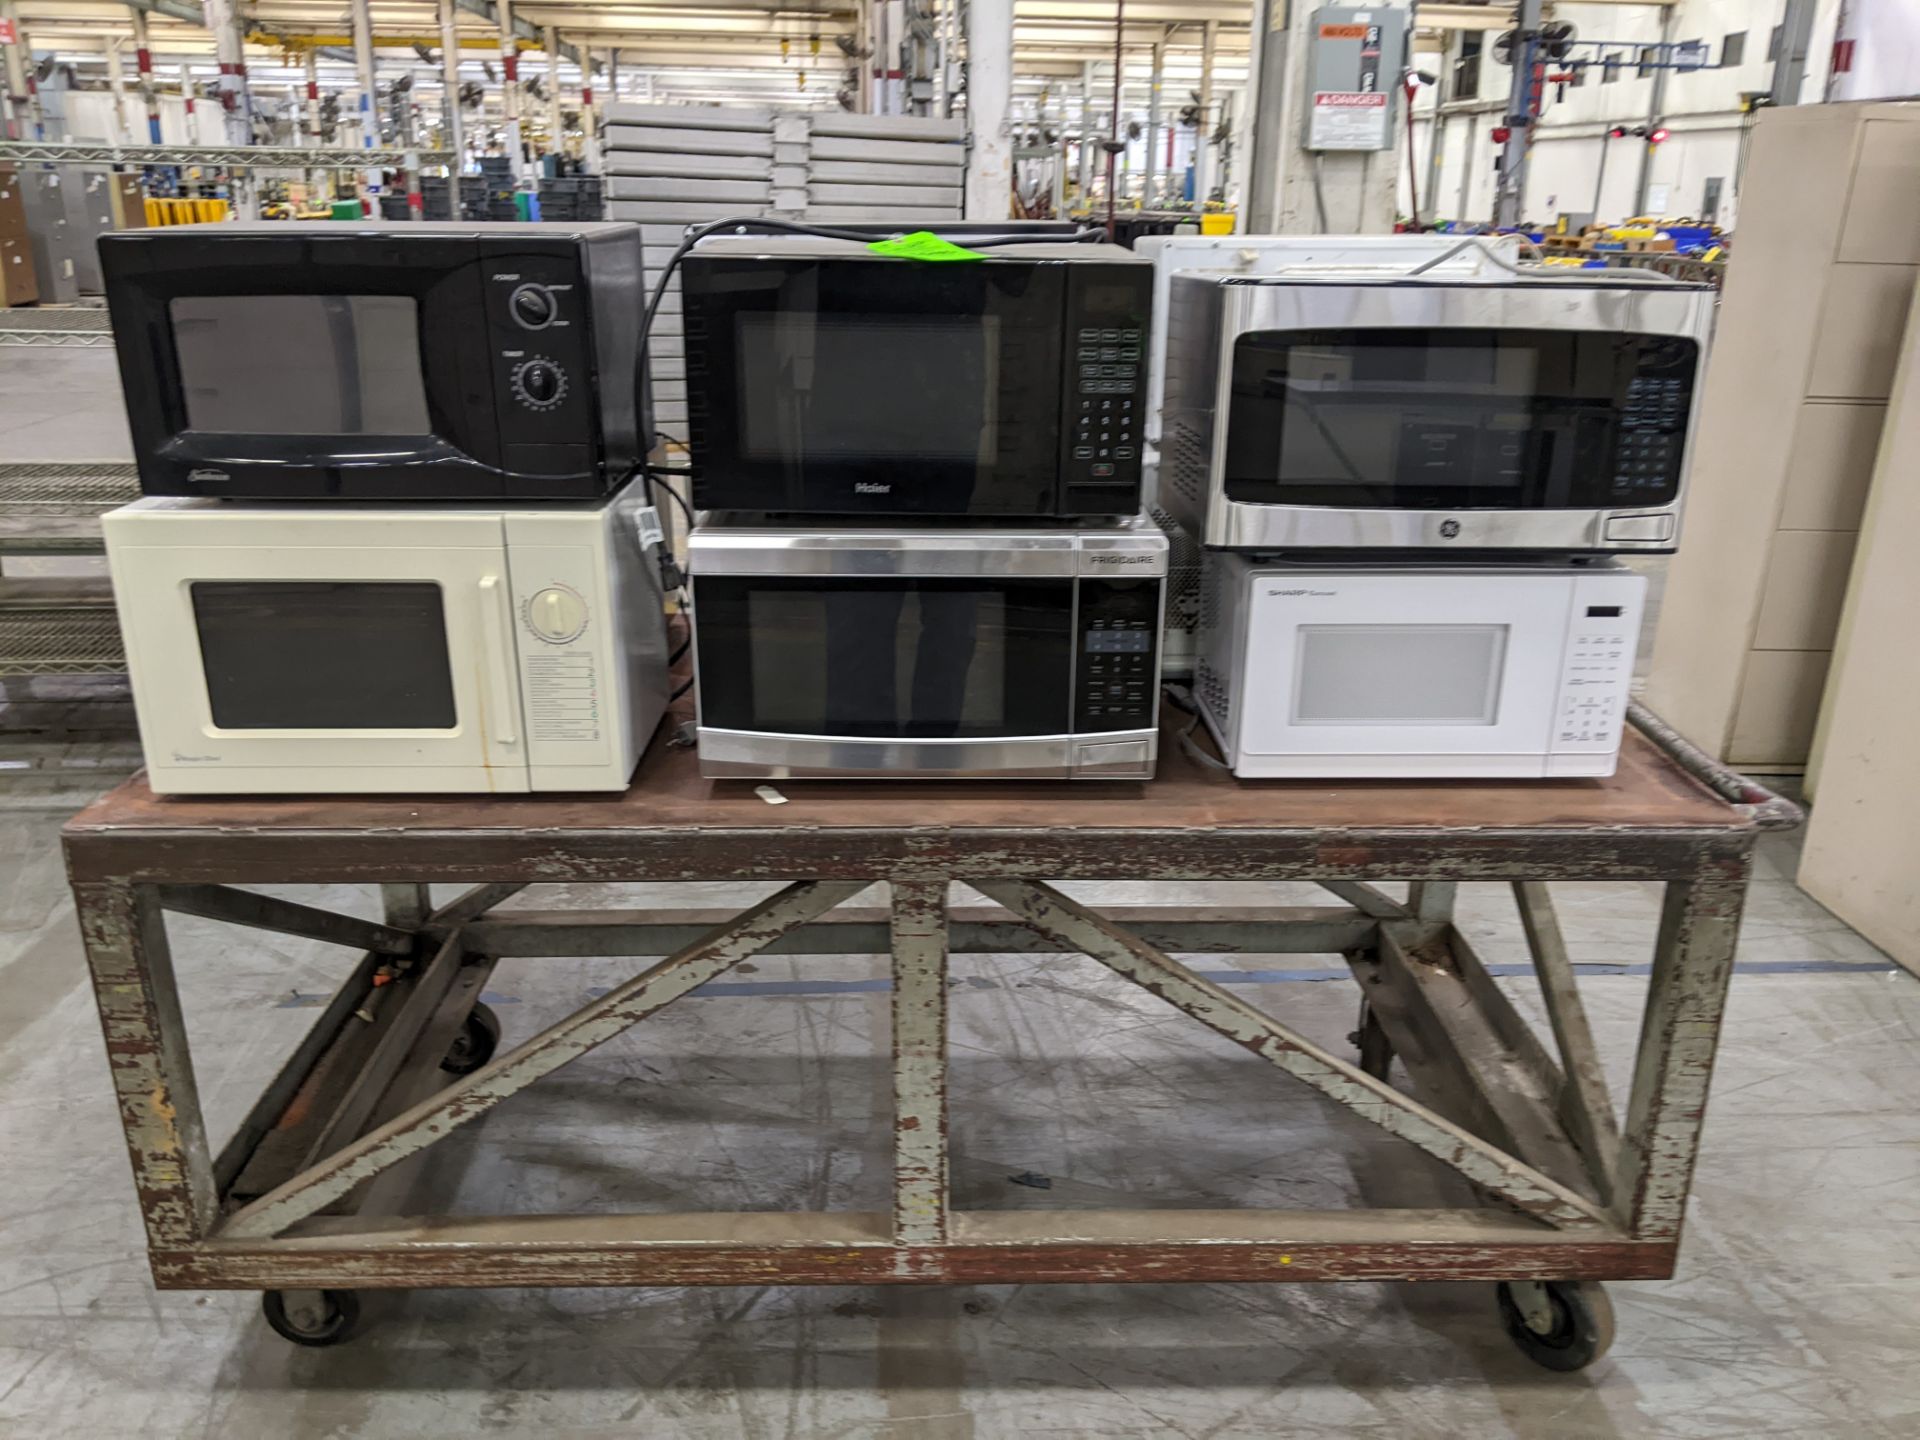 CART WITH (11) MICROWAVES